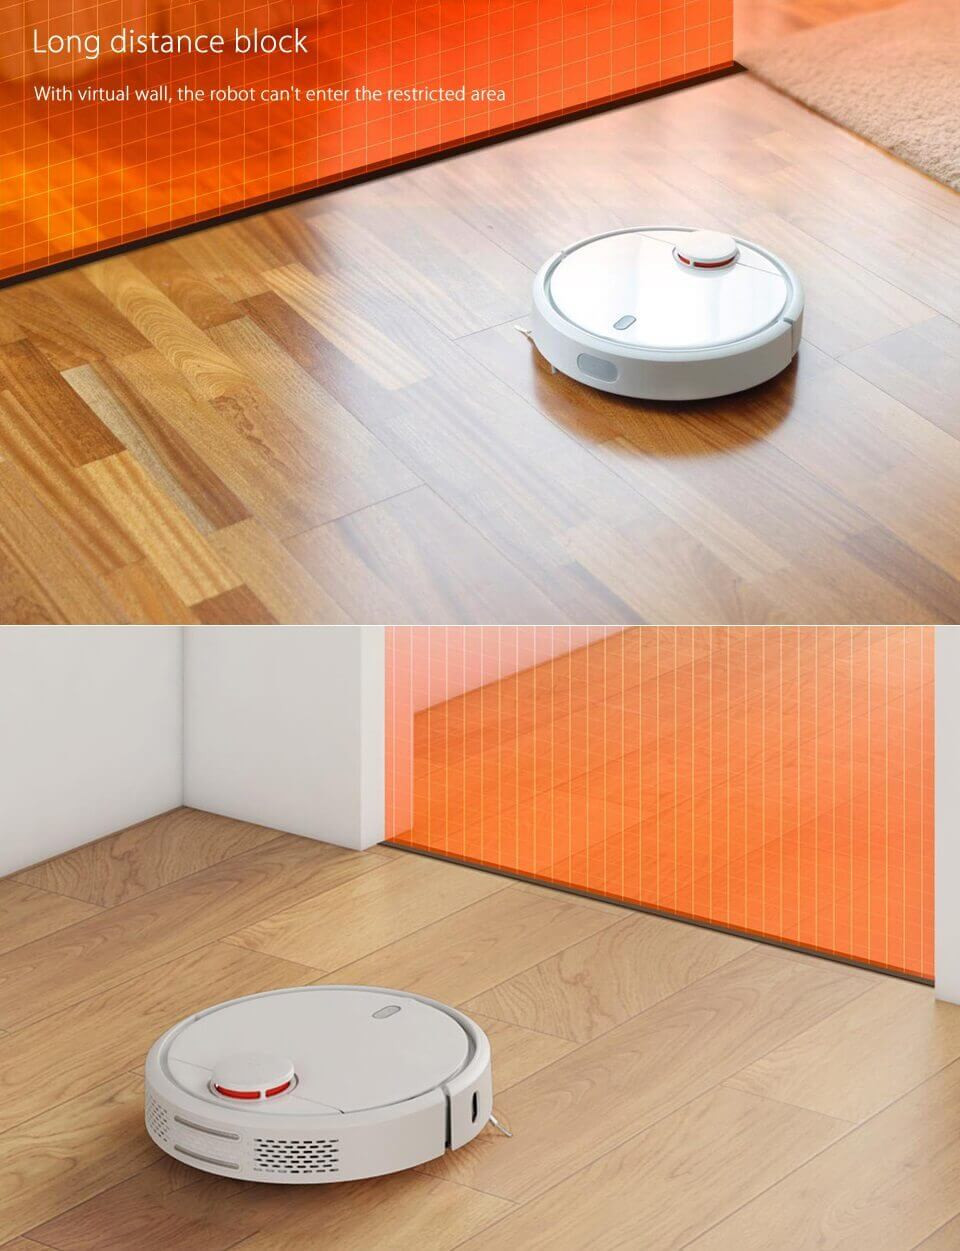 hardwood floor vacuum reviews of good cheap xiaomi mi robot vacuum cleaner vs irobot roomba 980 in lock areas with invisible wall